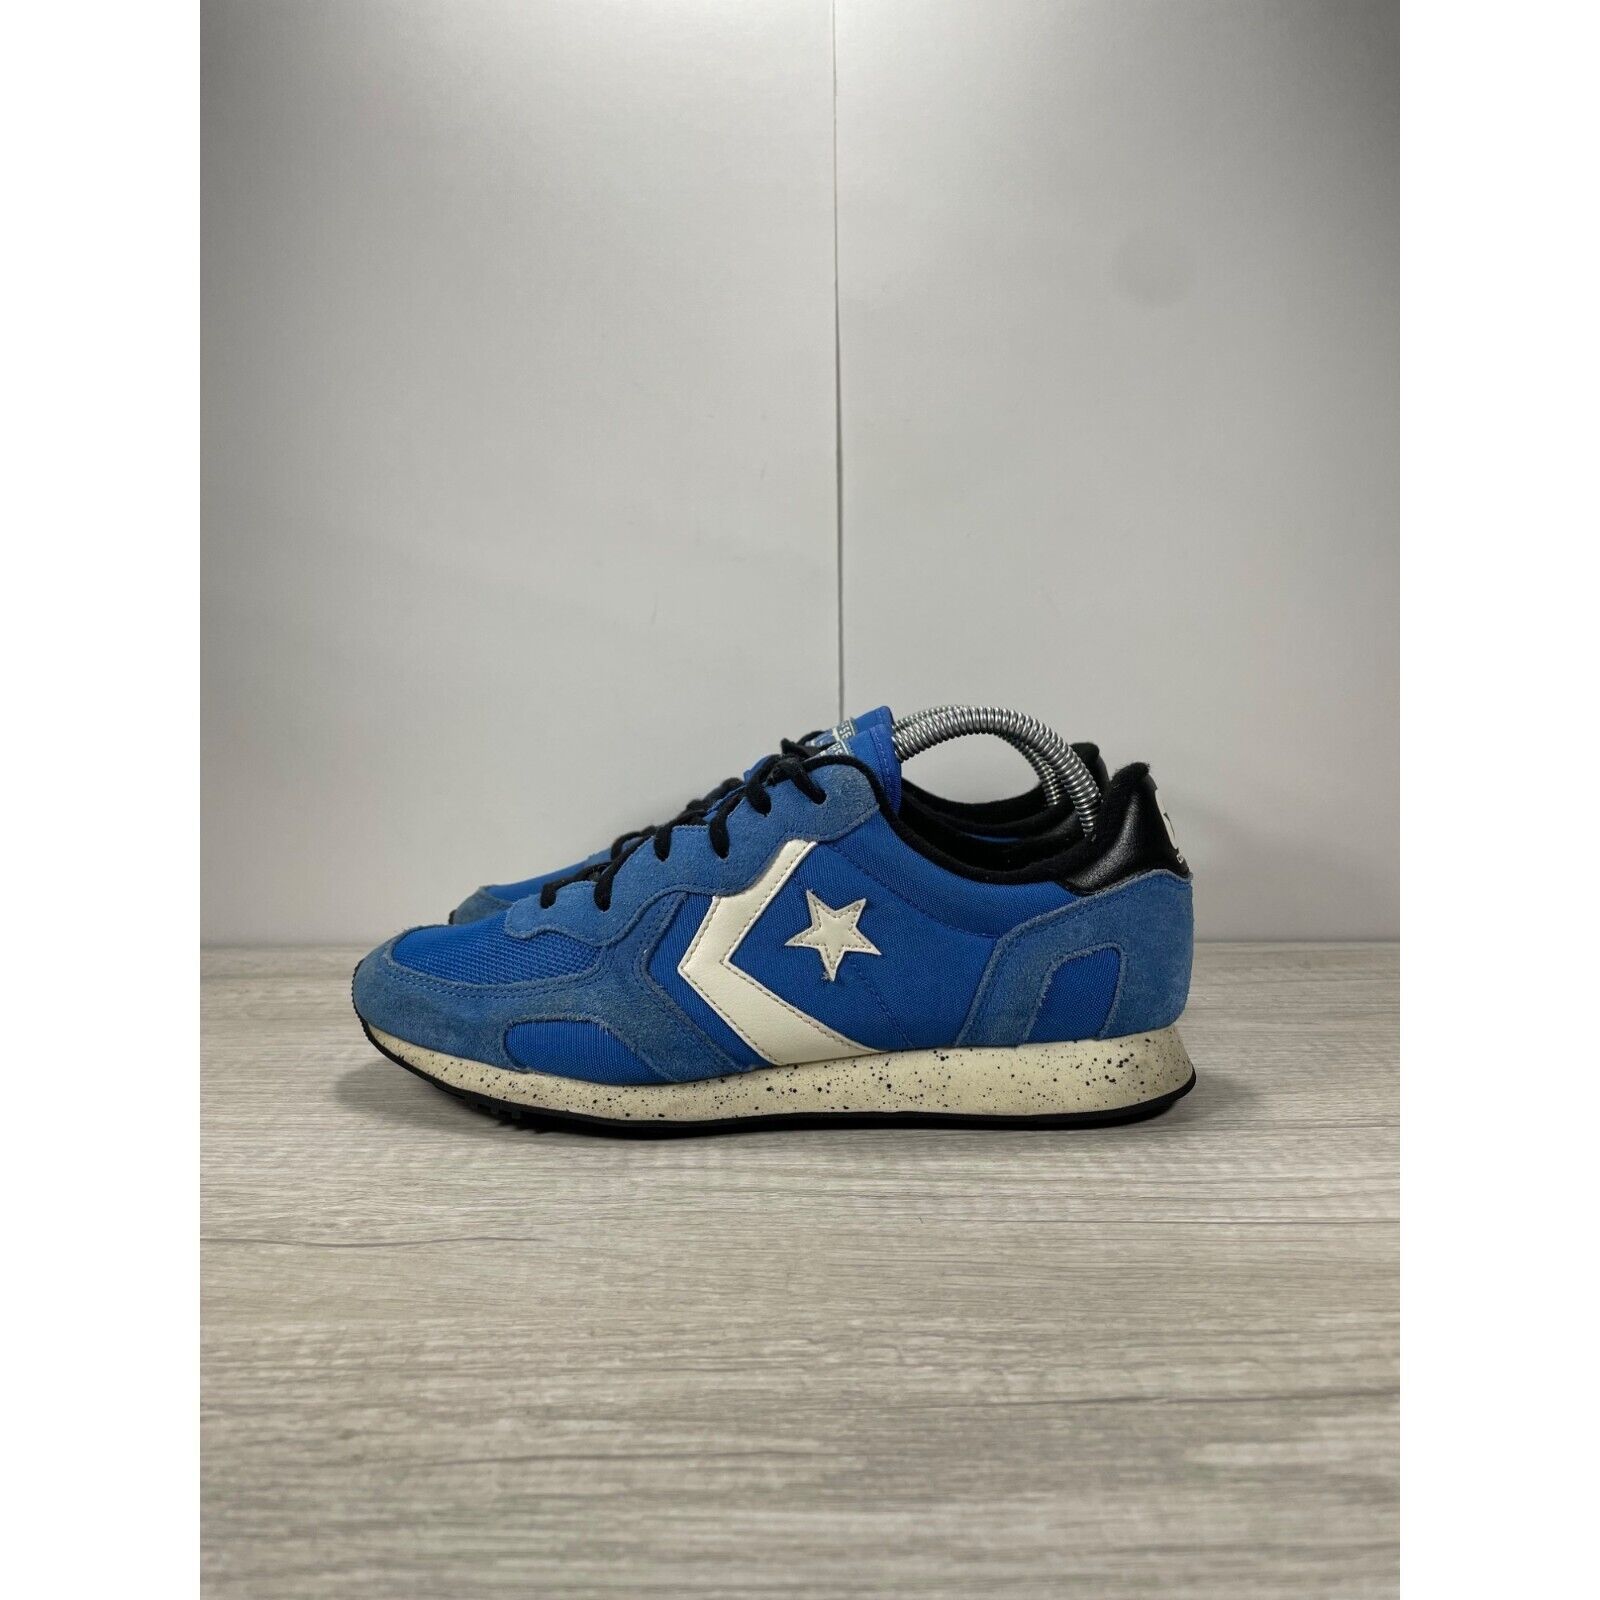 proteína fluido sí mismo Converse Auckland Racer OX Blue Athletic Running Shoes Unisex Mens Size 8 |  eBay